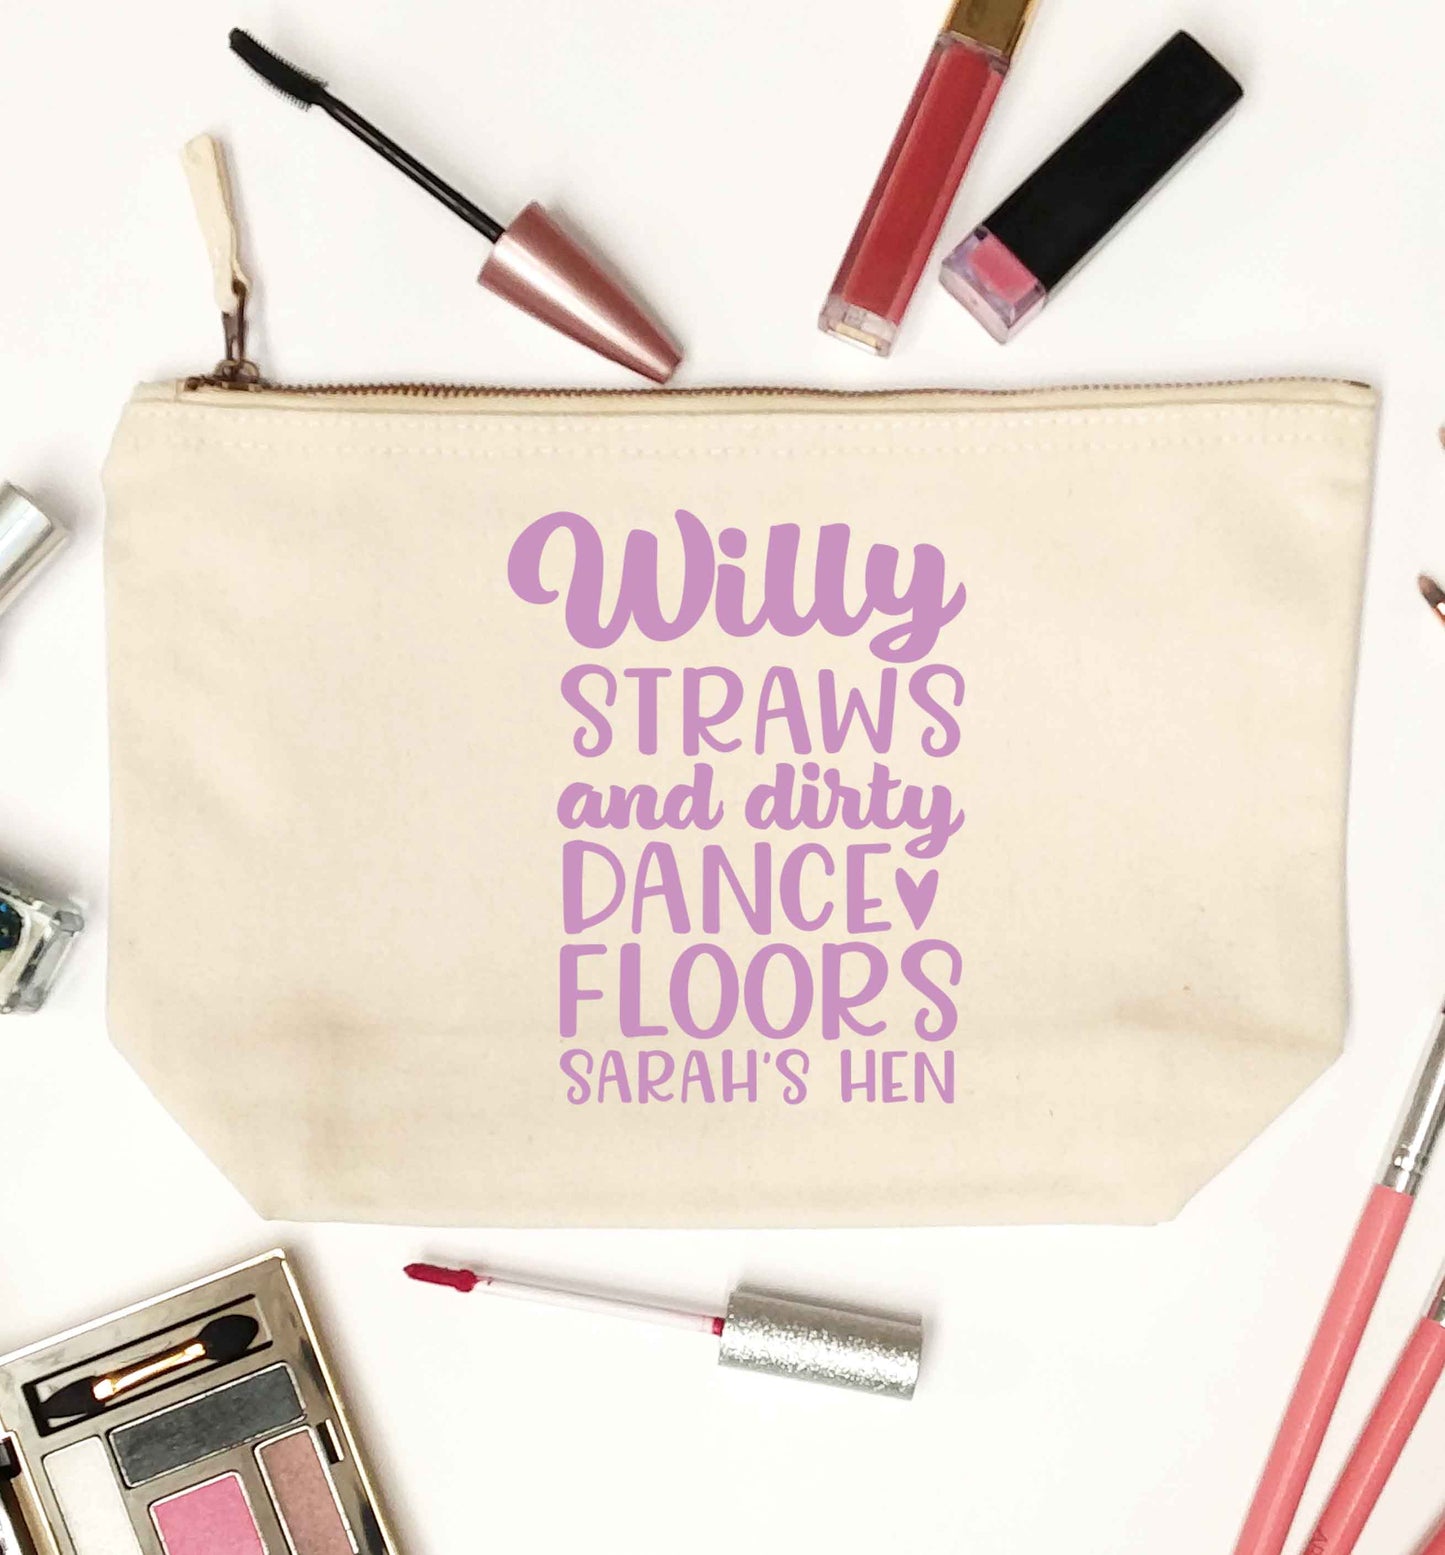 Willy straws and dirty dance floors natural makeup bag